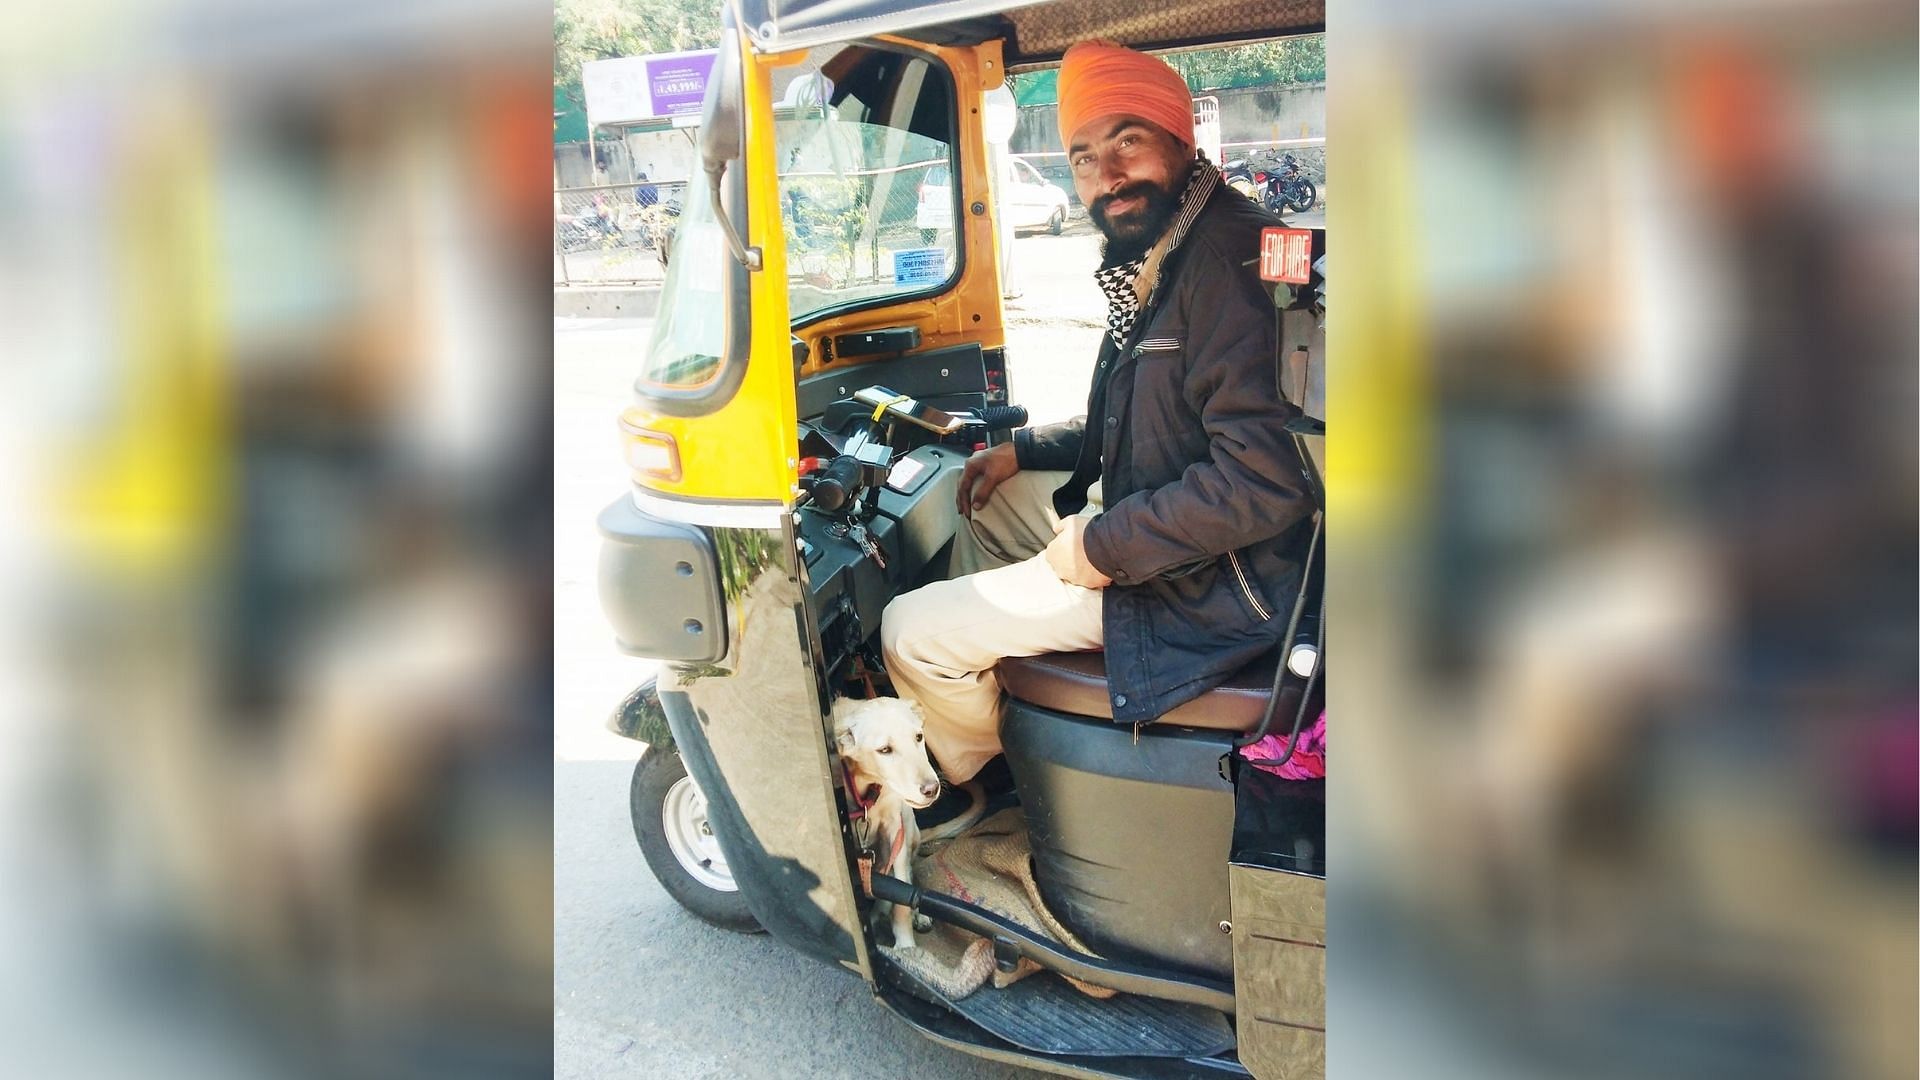 Auto Driver Accompanied by Pet Dog Goes Viral, Facebook Reacts